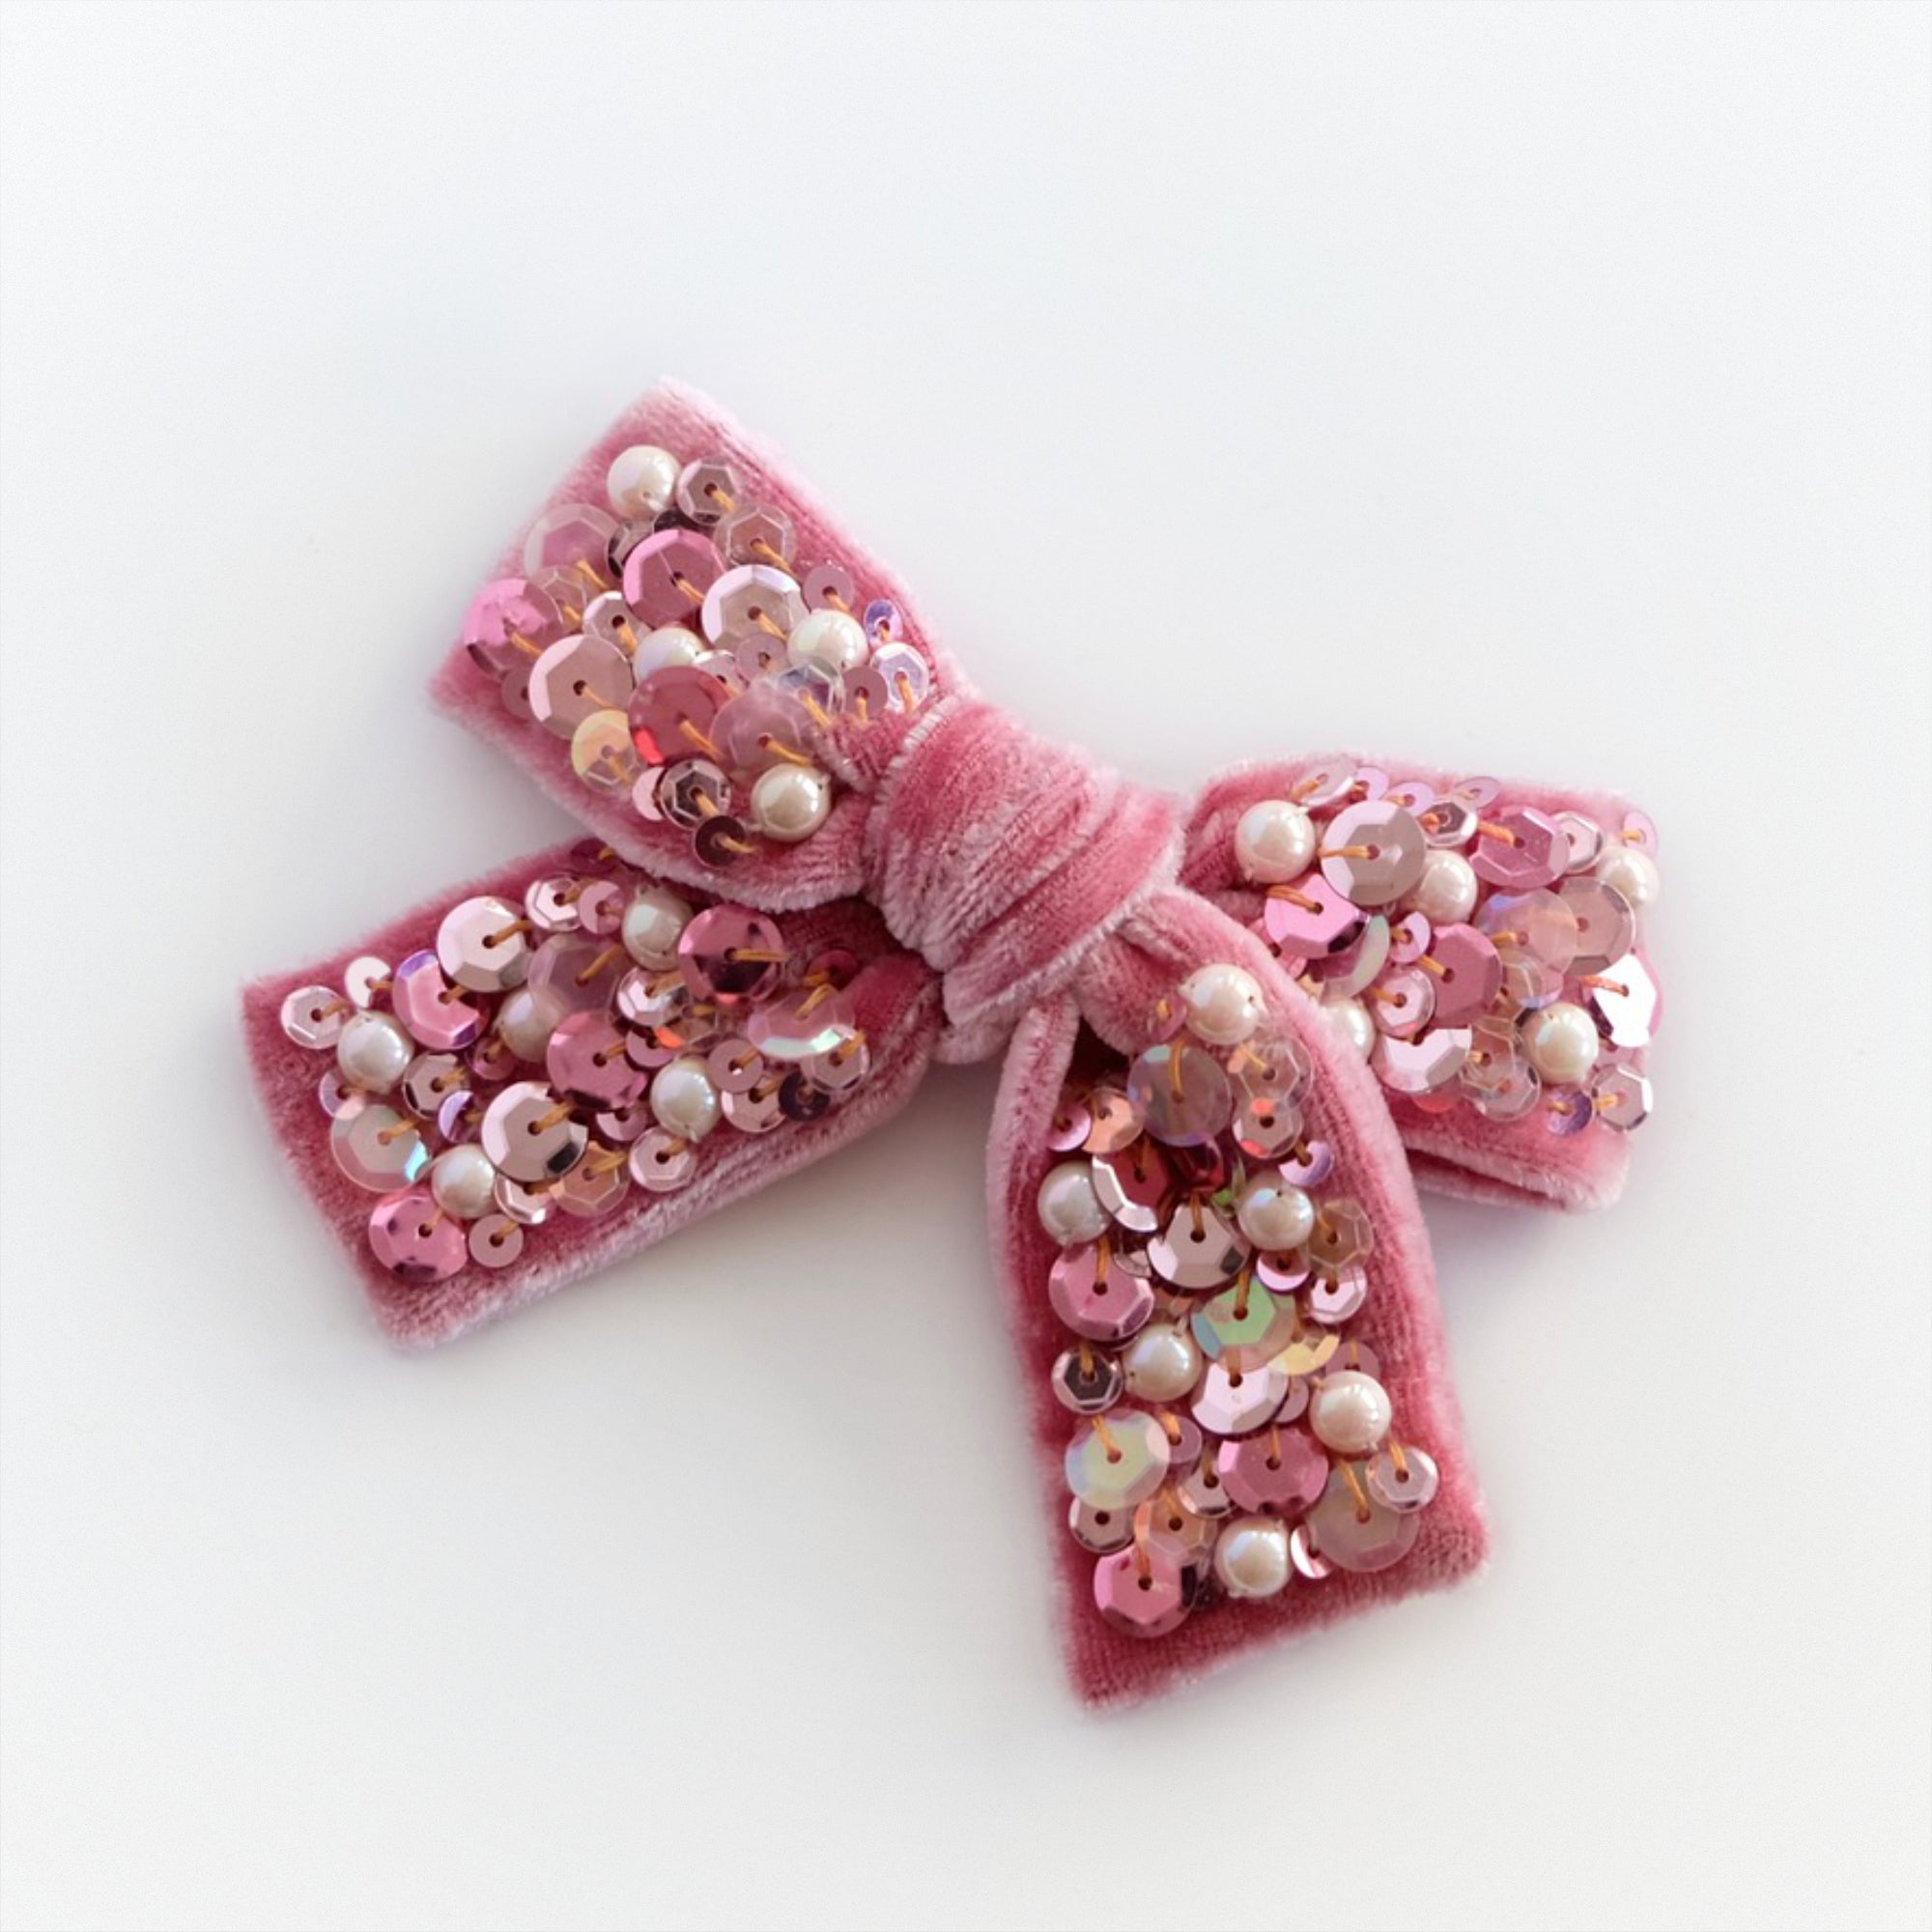 Velvet hair bow for girls in pink embellished with sequin and pearls.